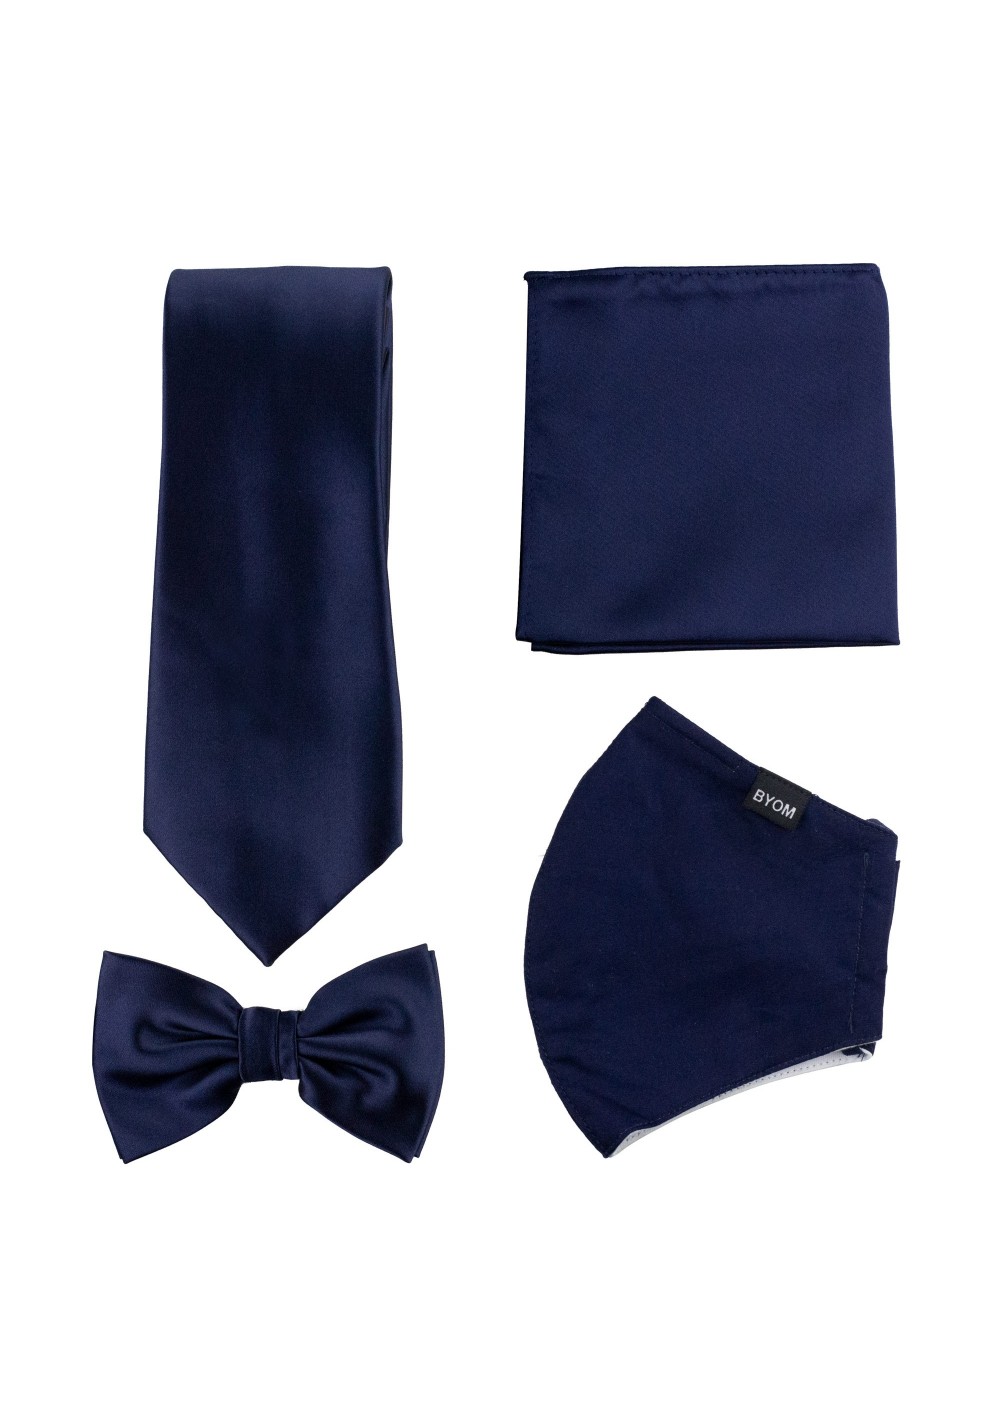 Solid Navy Mask and Tie Set